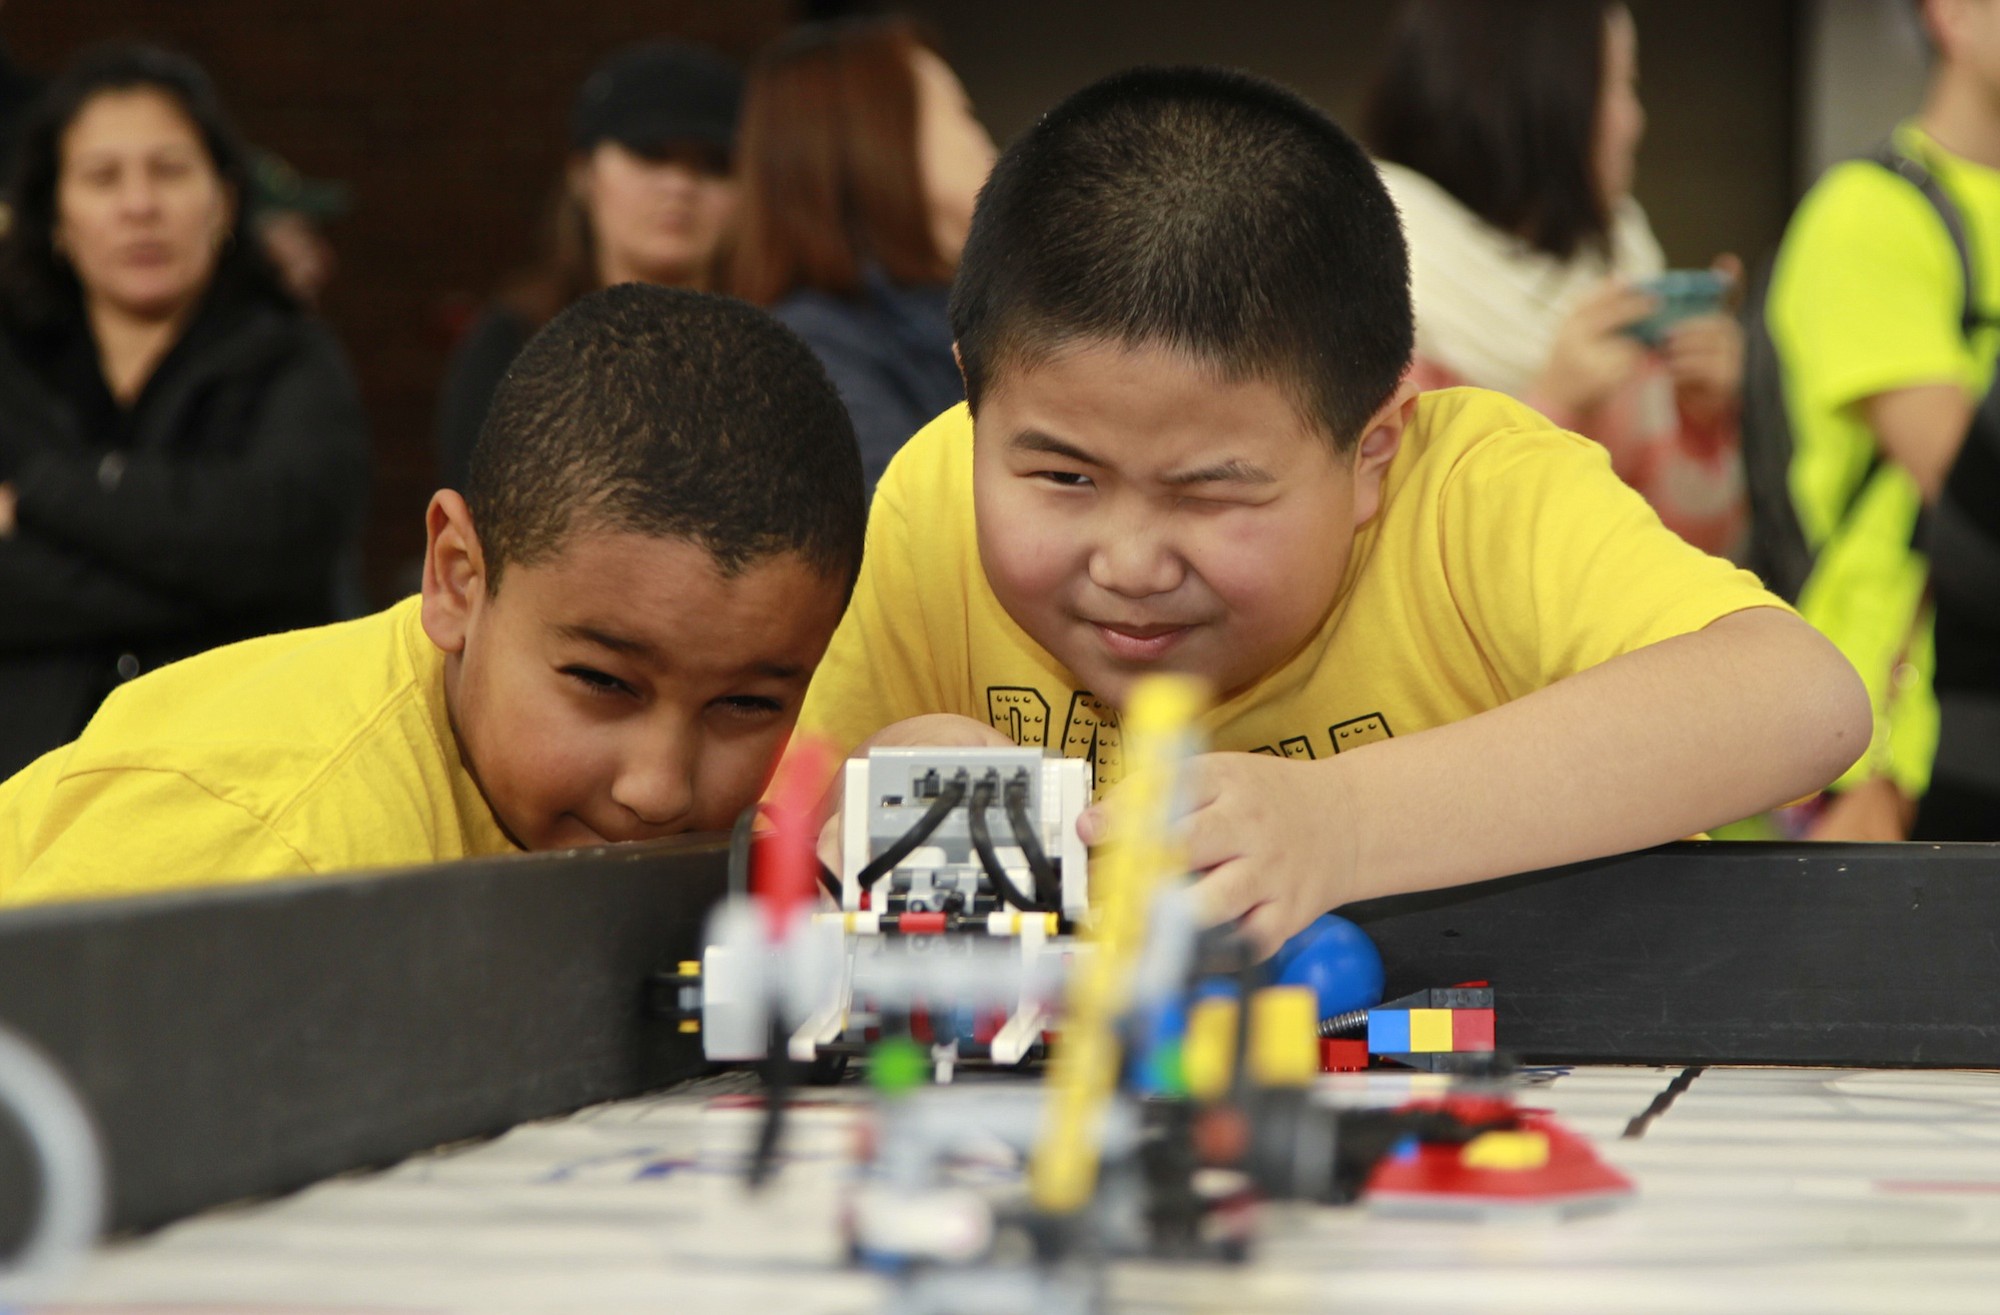 Banana Bot teammates Mohammed Alamin, left, and Dao Zhu compete in a robotics tournament Sunday at Salmon Creek Elementary School.